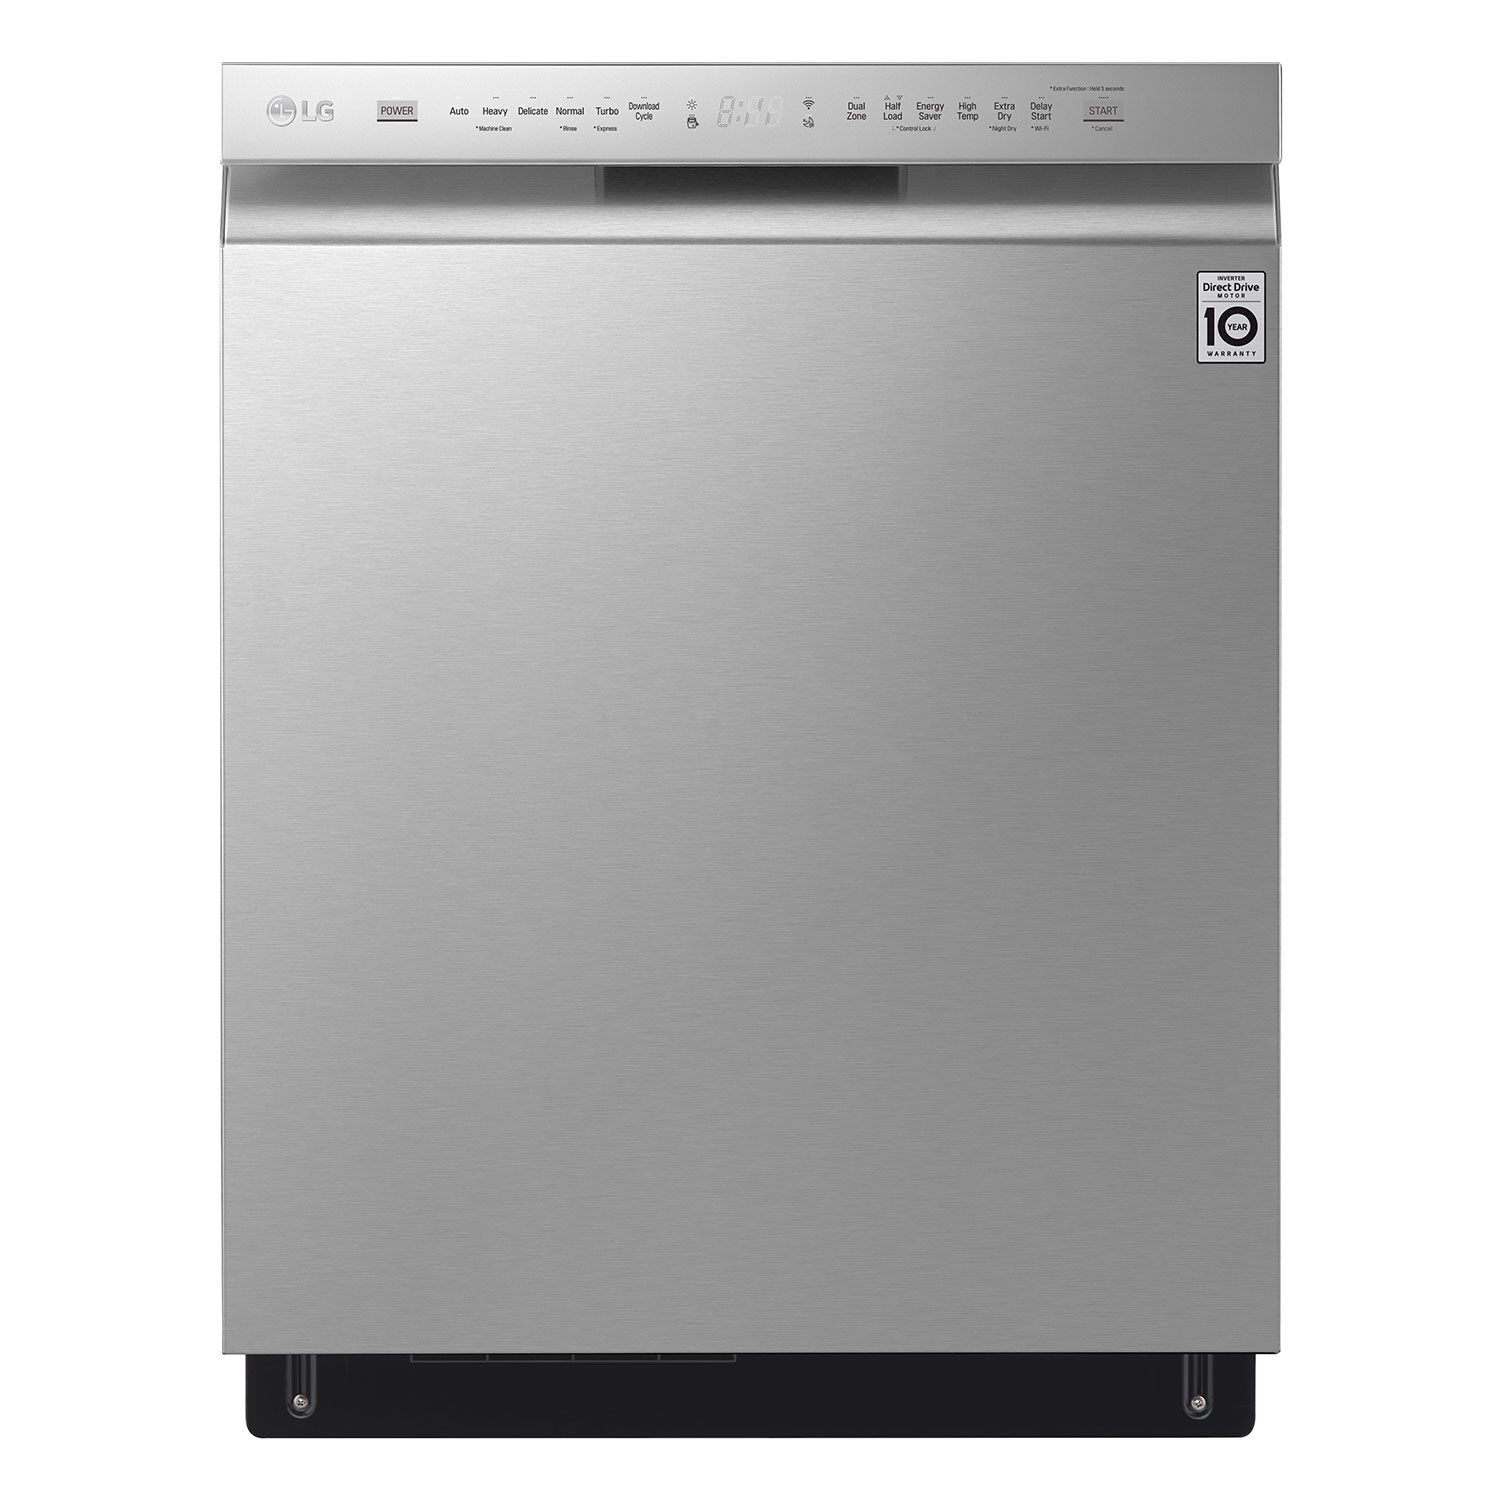 LG LDF5678ST Front Control Wi-Fi Enabled Dishwasher with QuadWash